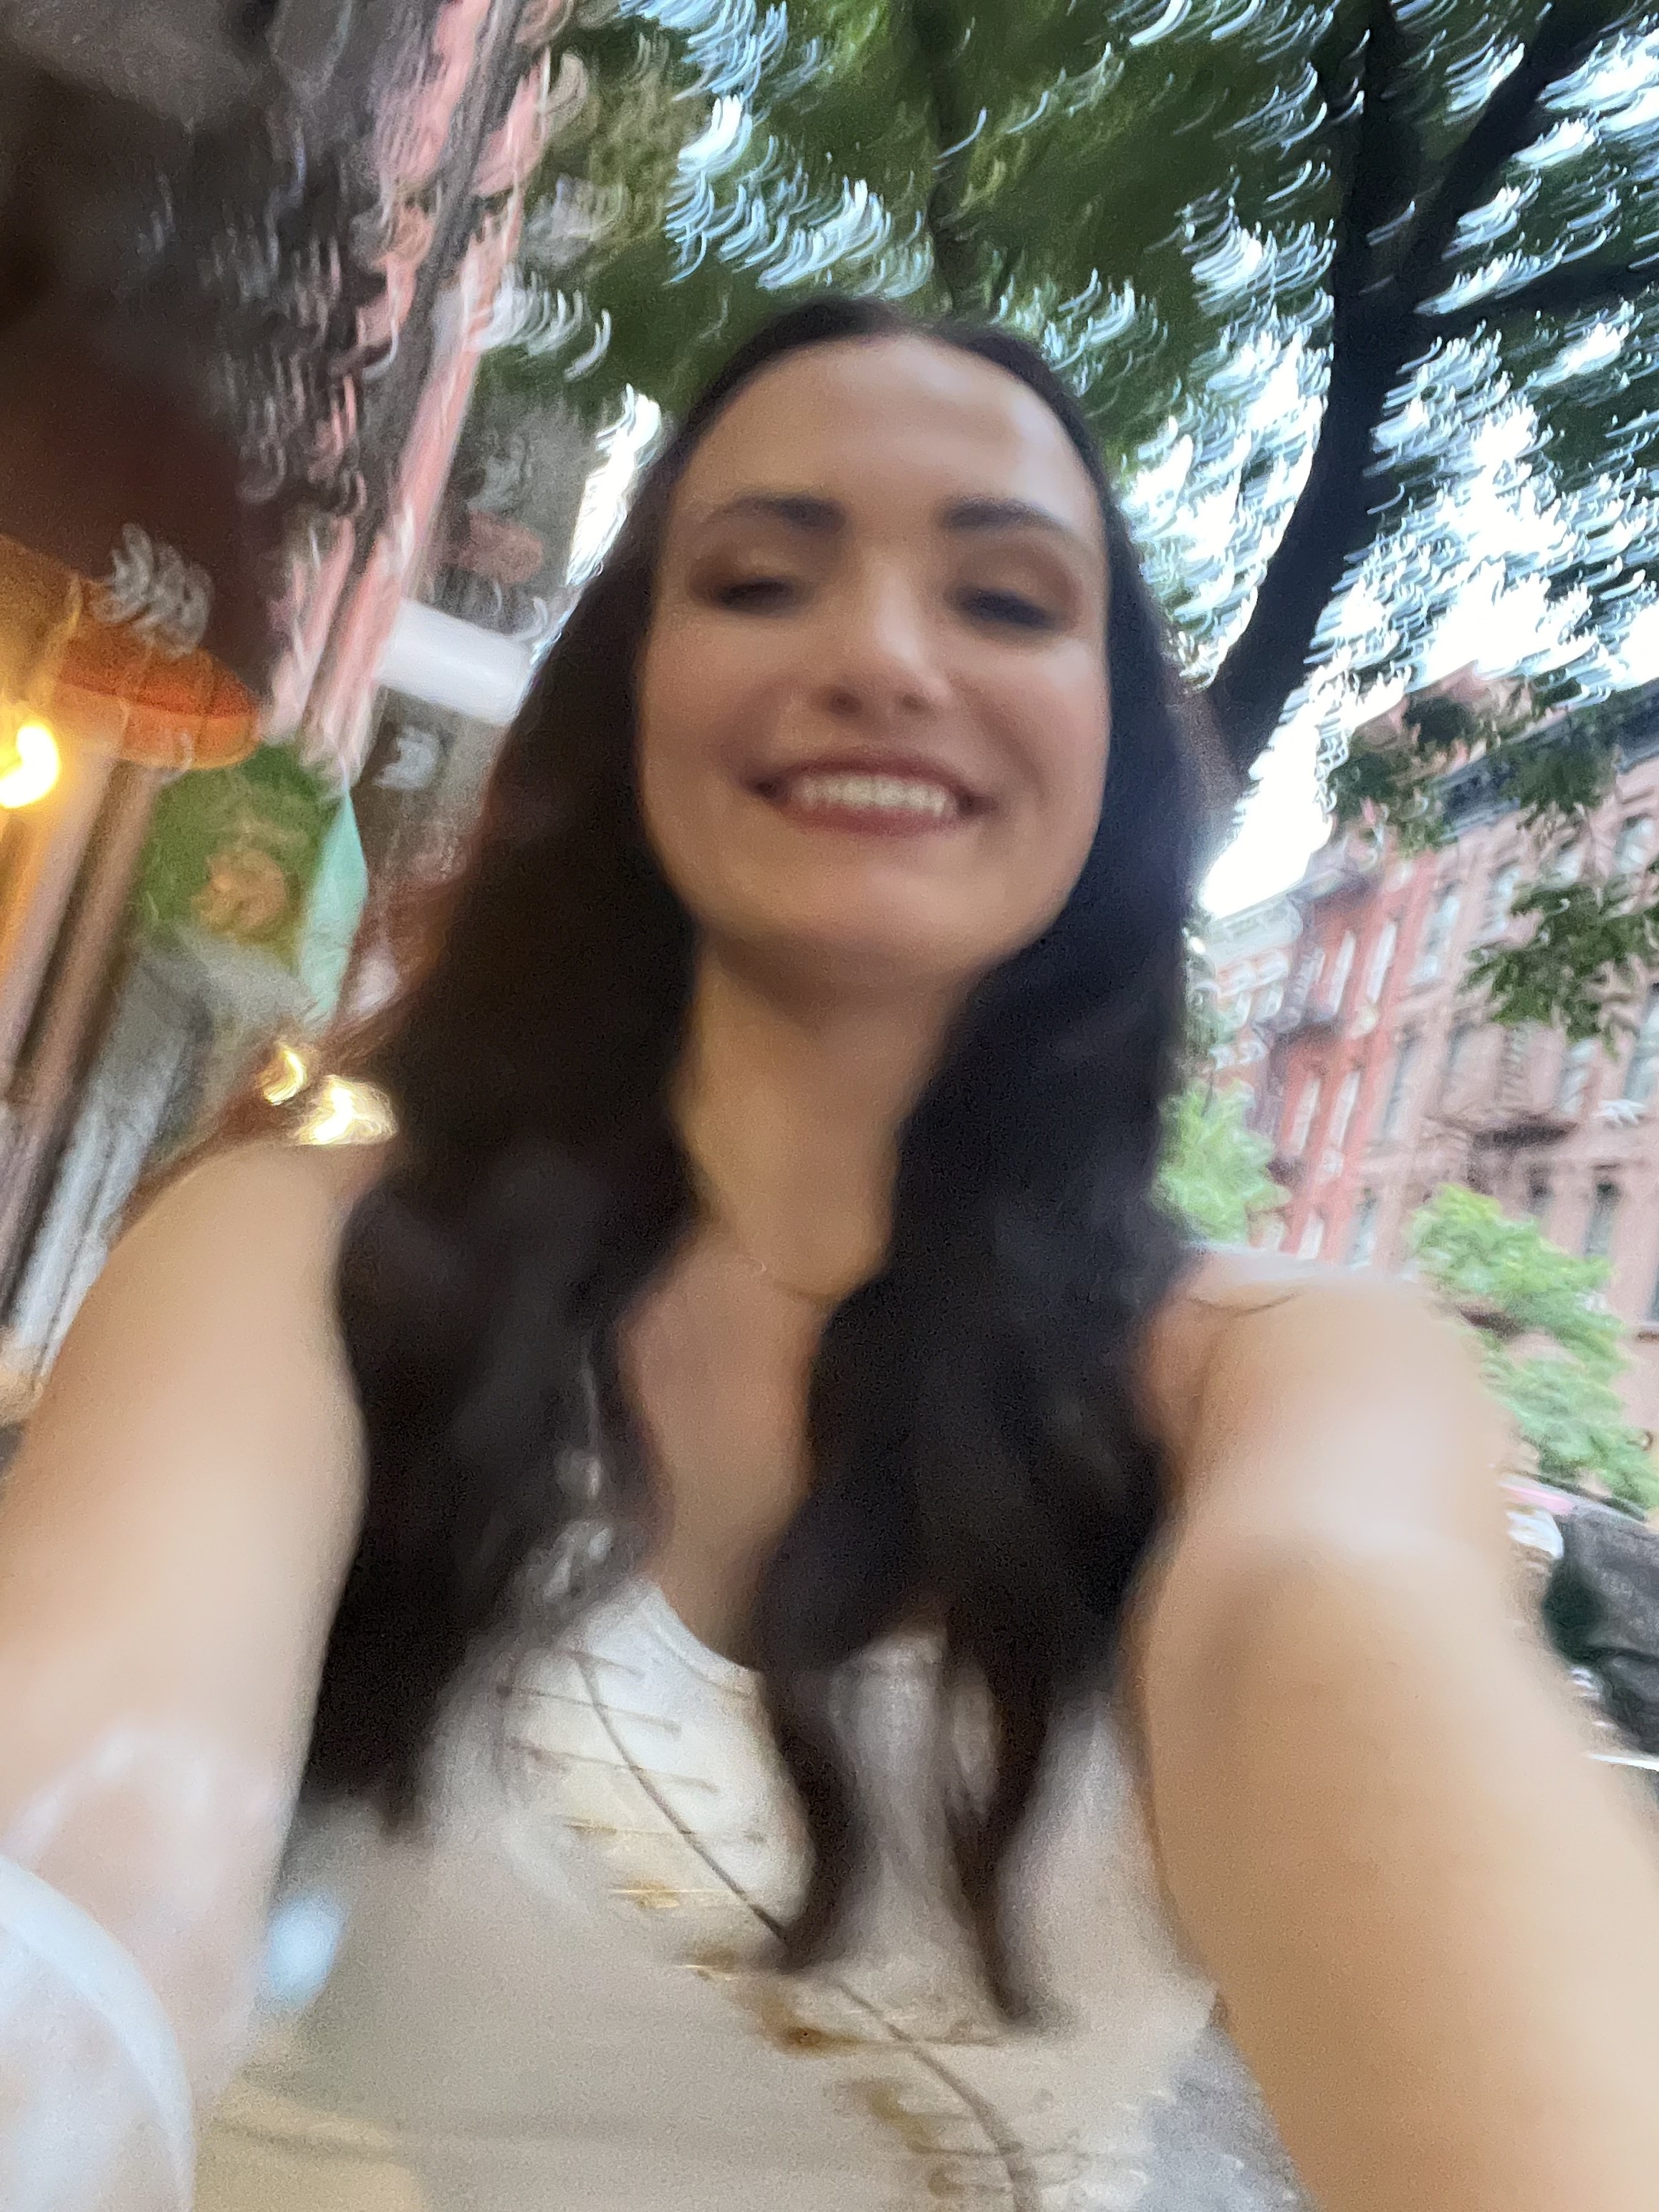 author taking a selfie on the street